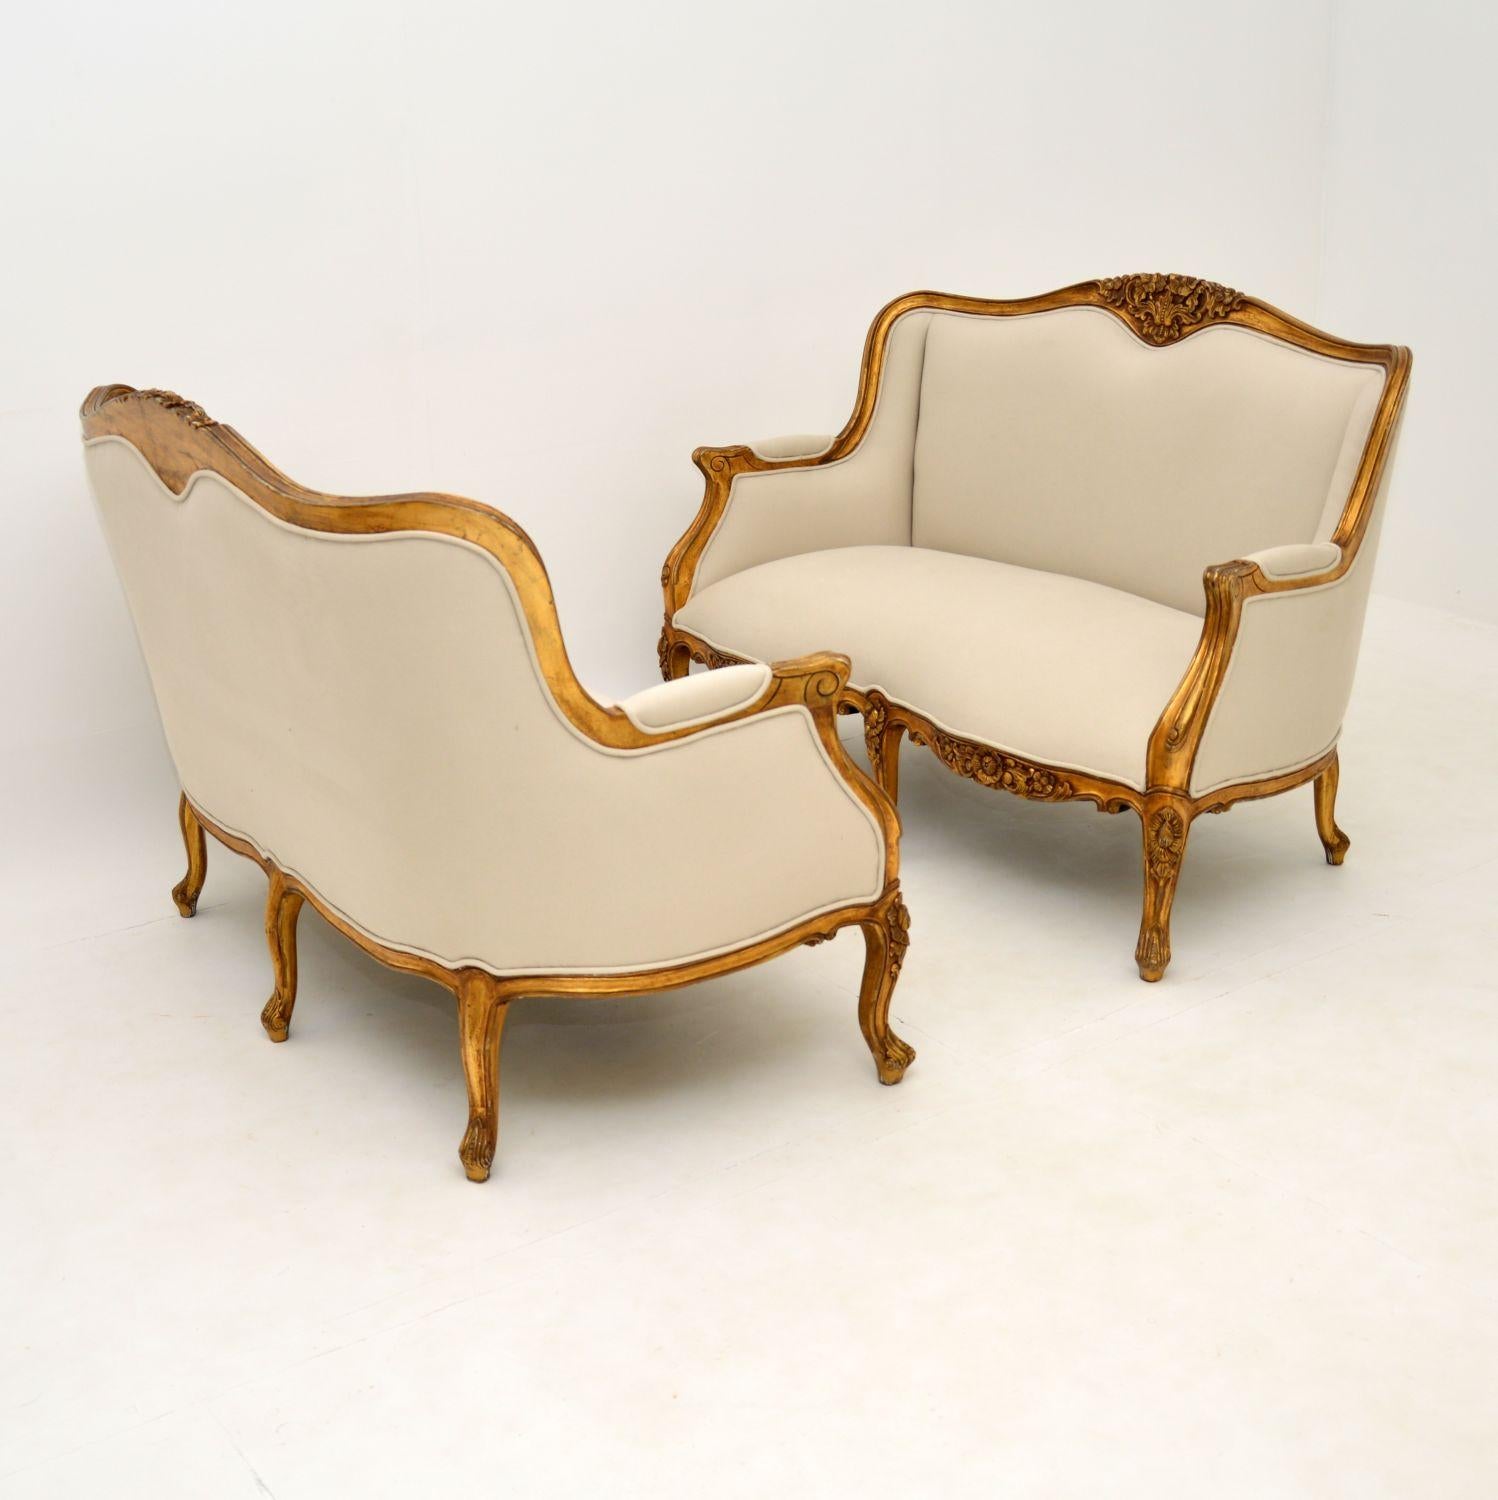 A stunning and top quality pair of two seater sofas in the antique French style which I would date from around the 1950’s period.

They are beautifully made, with a gorgeous shape and beautiful carving. They gilt wood frames have some minor wear